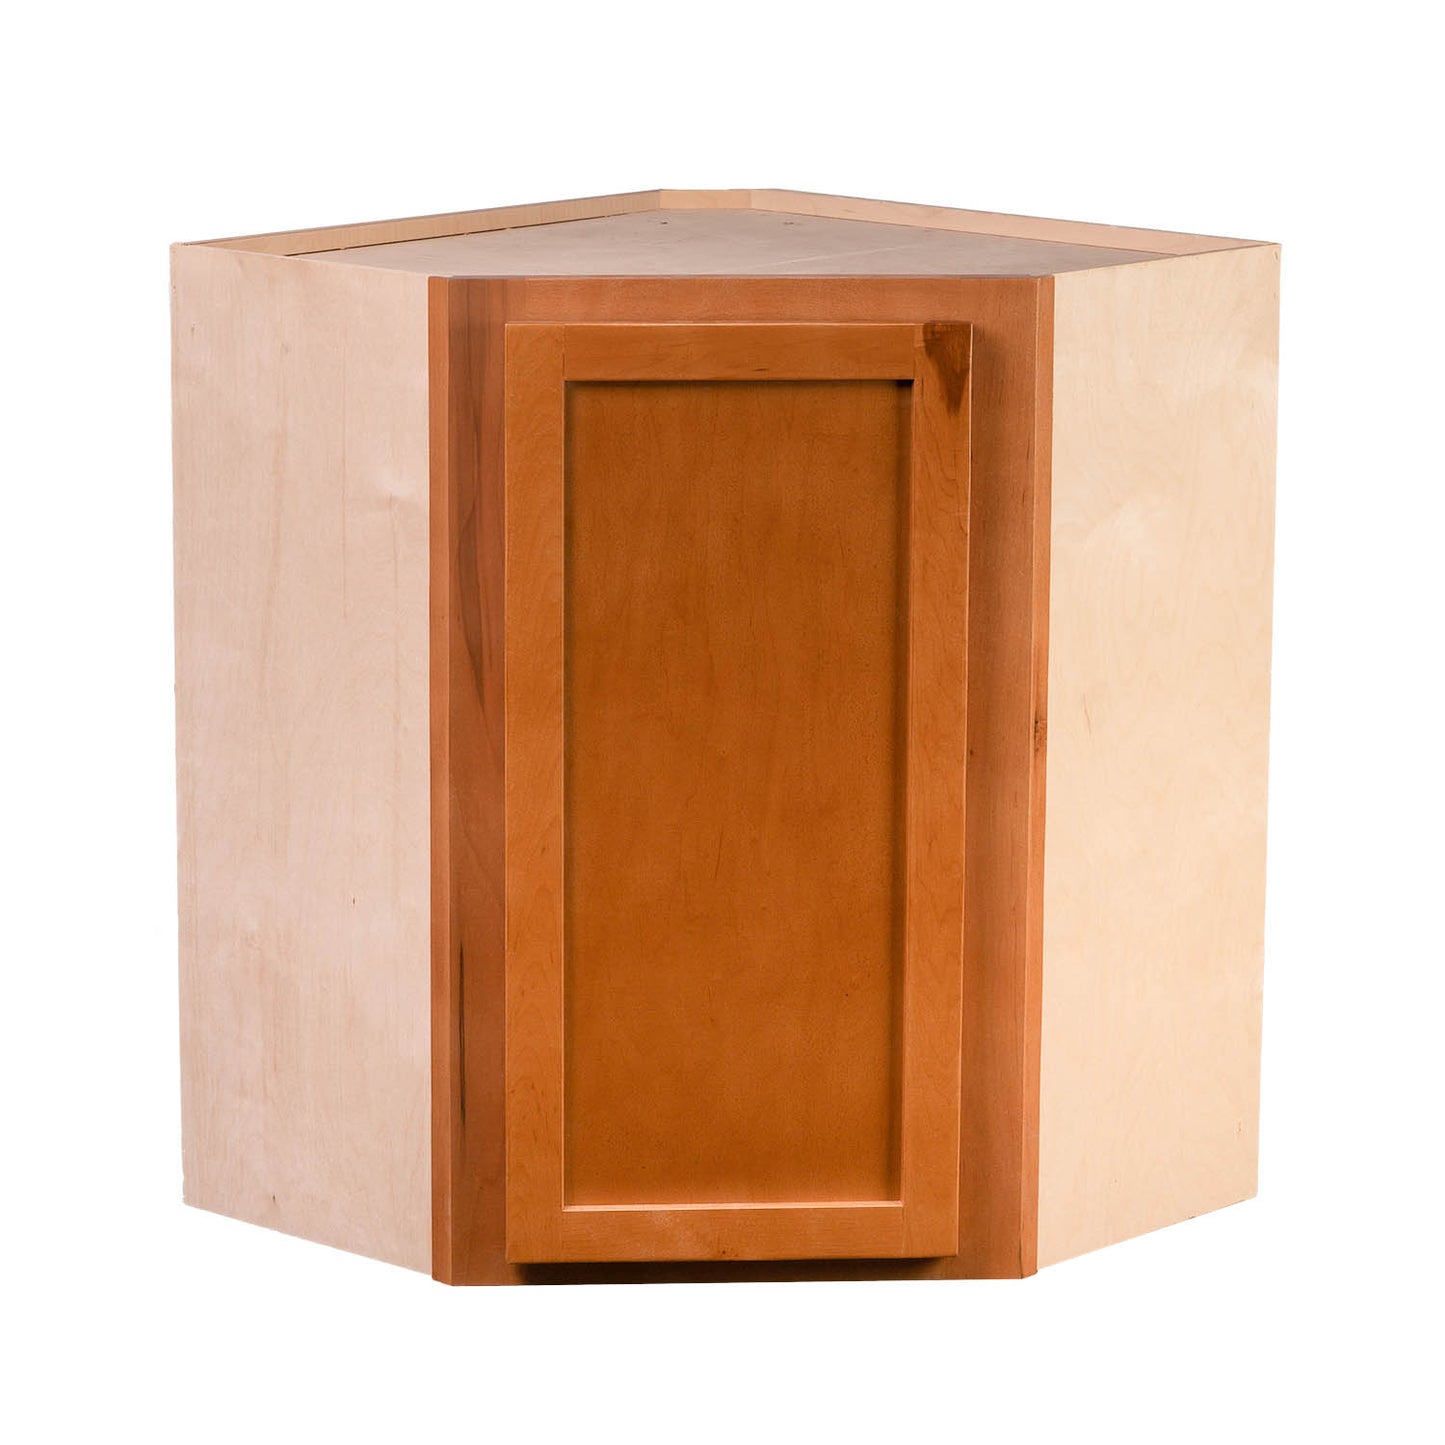 Quicklock RTA (Ready-to-Assemble) Provincial Stain 24"WX36"HX12"D Wall Corner Cabinet